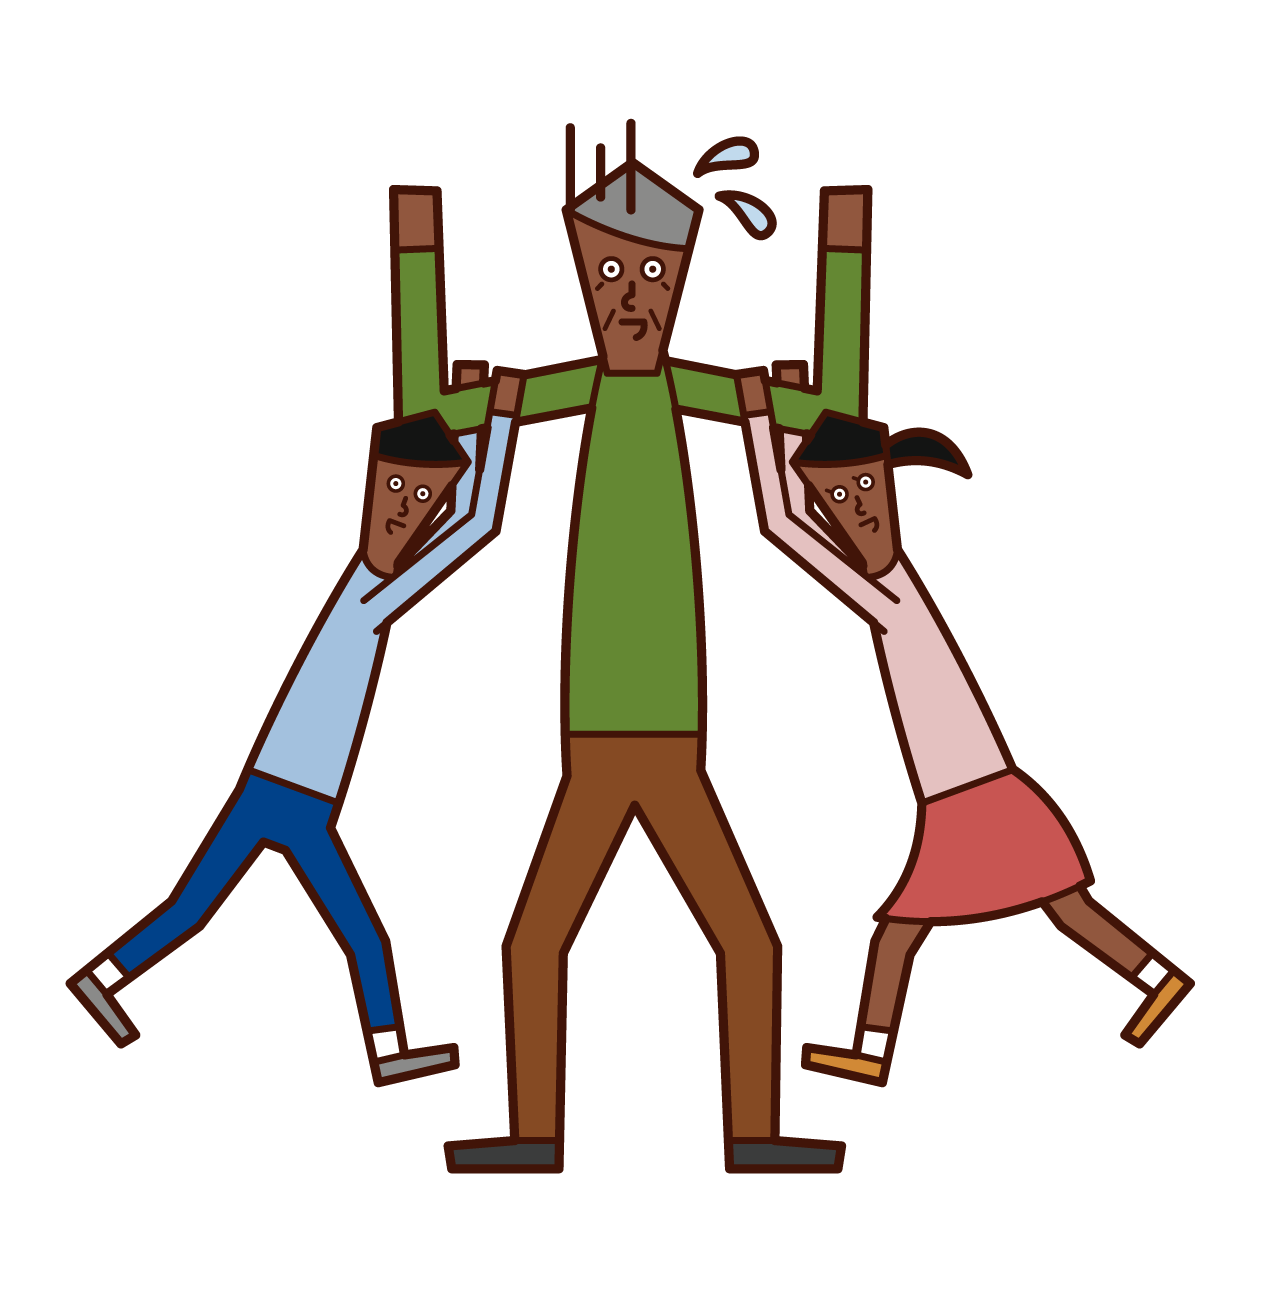 Illustration of an old man playing with children